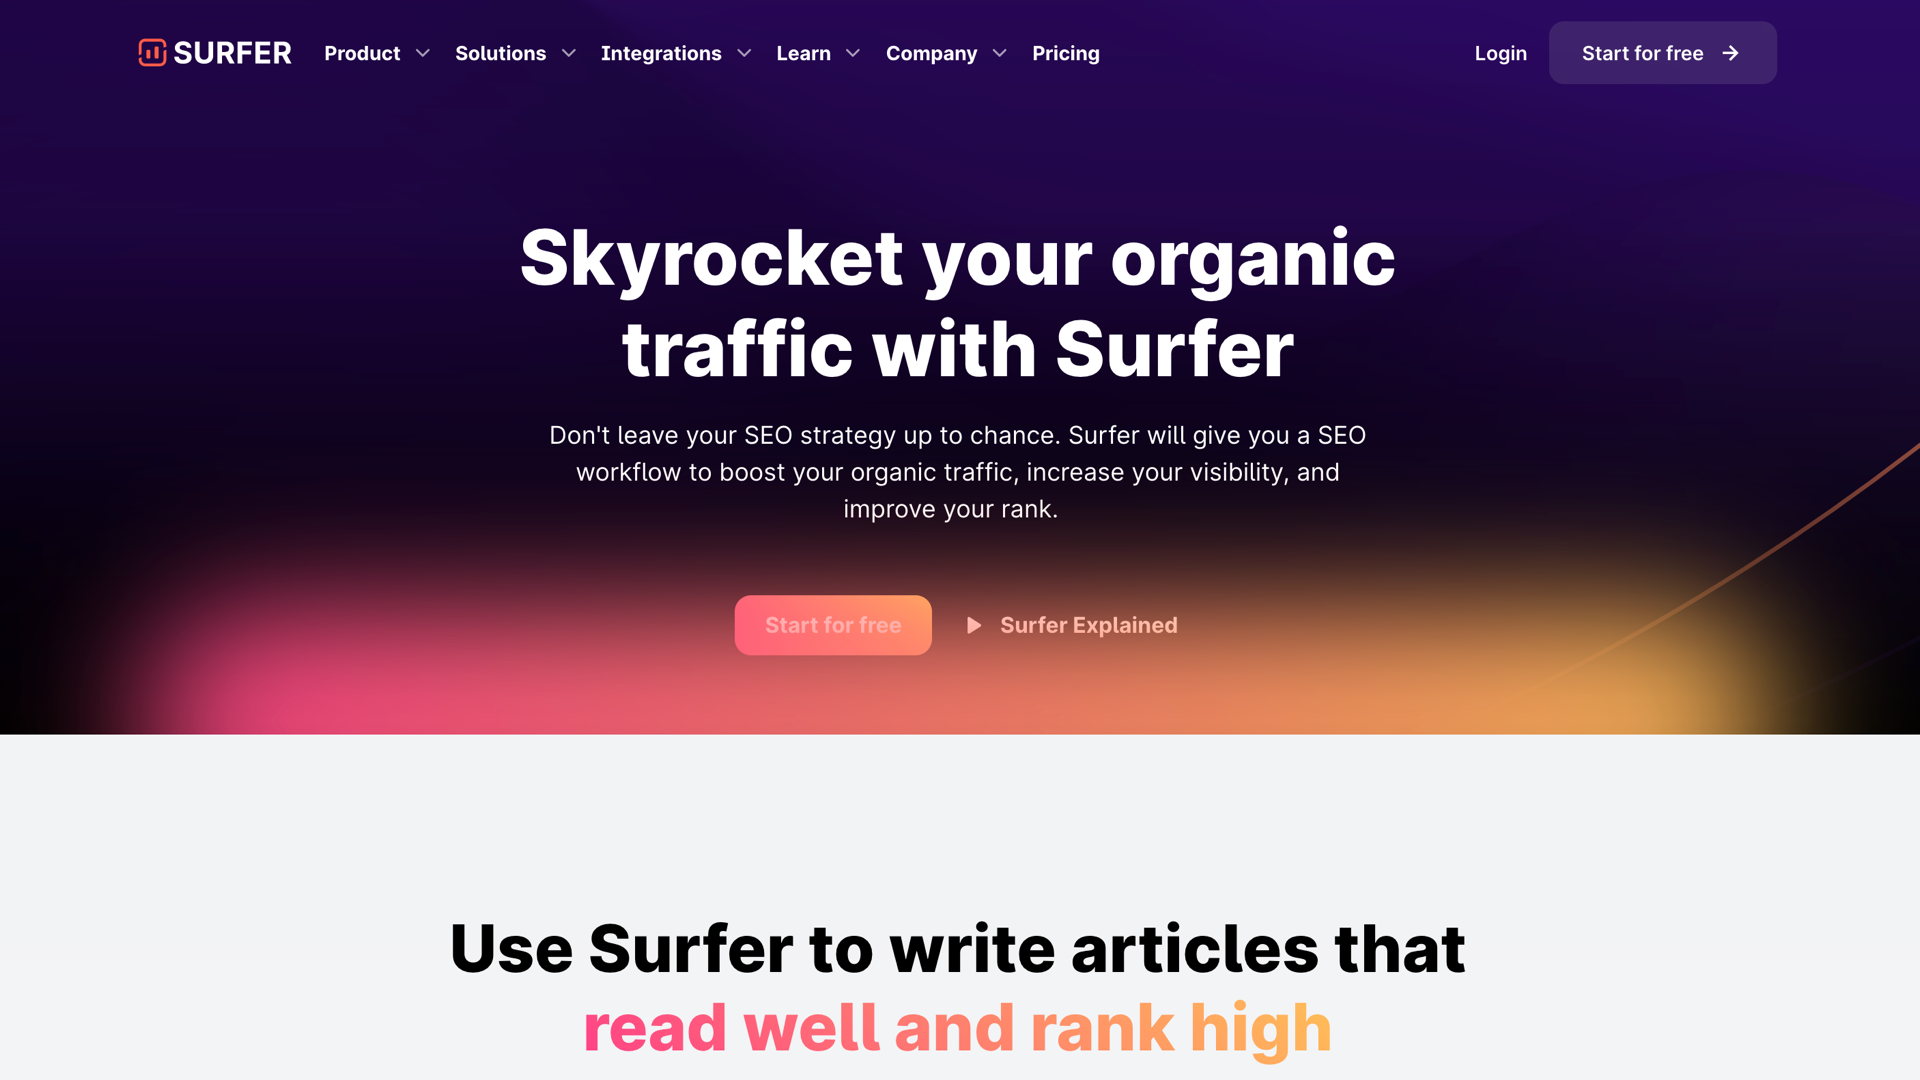 An image about the Surfer SEO tool